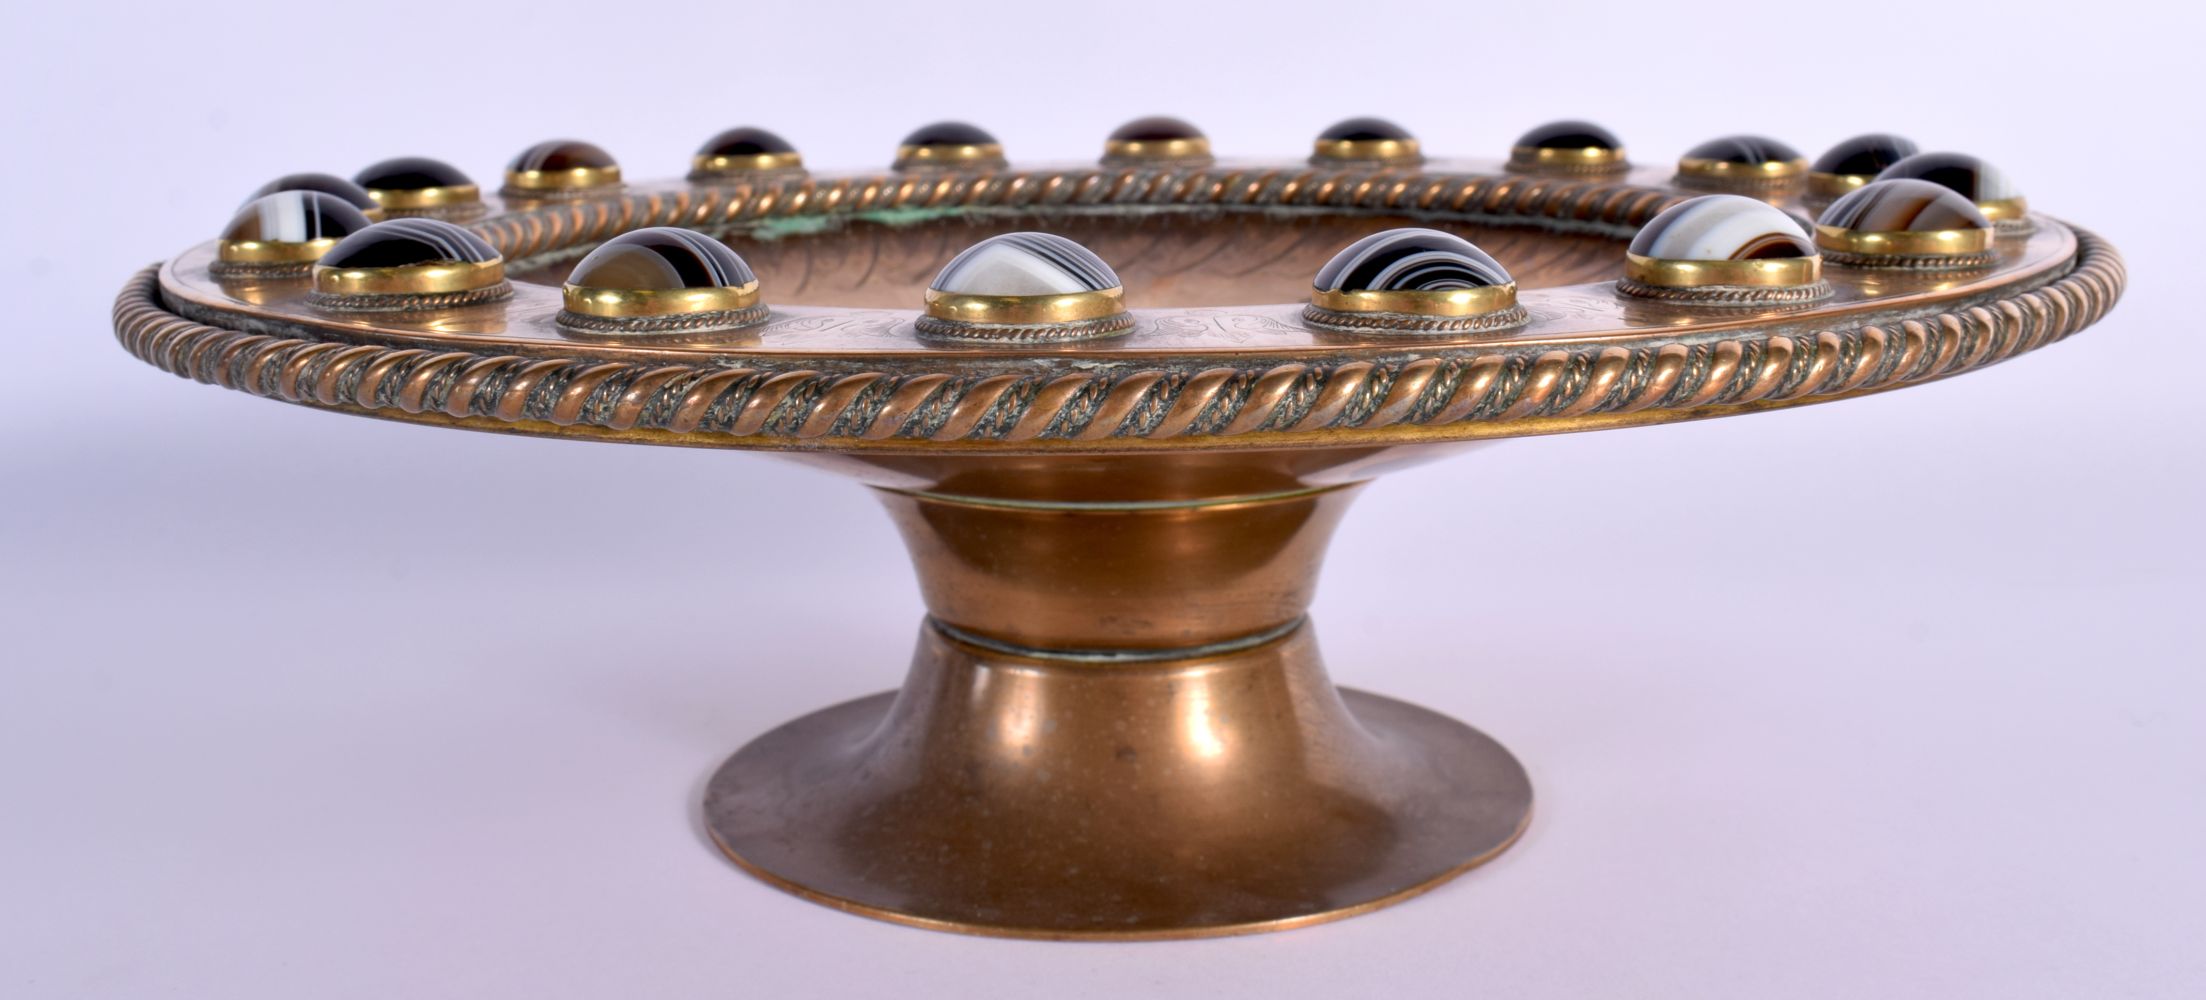 A LOVELY LARGE 19TH CENTURY EUROPEAN AGATE MOUNTED BRONZE TAZZA decorated with foliage. 28 cm x 10 c - Bild 4 aus 8